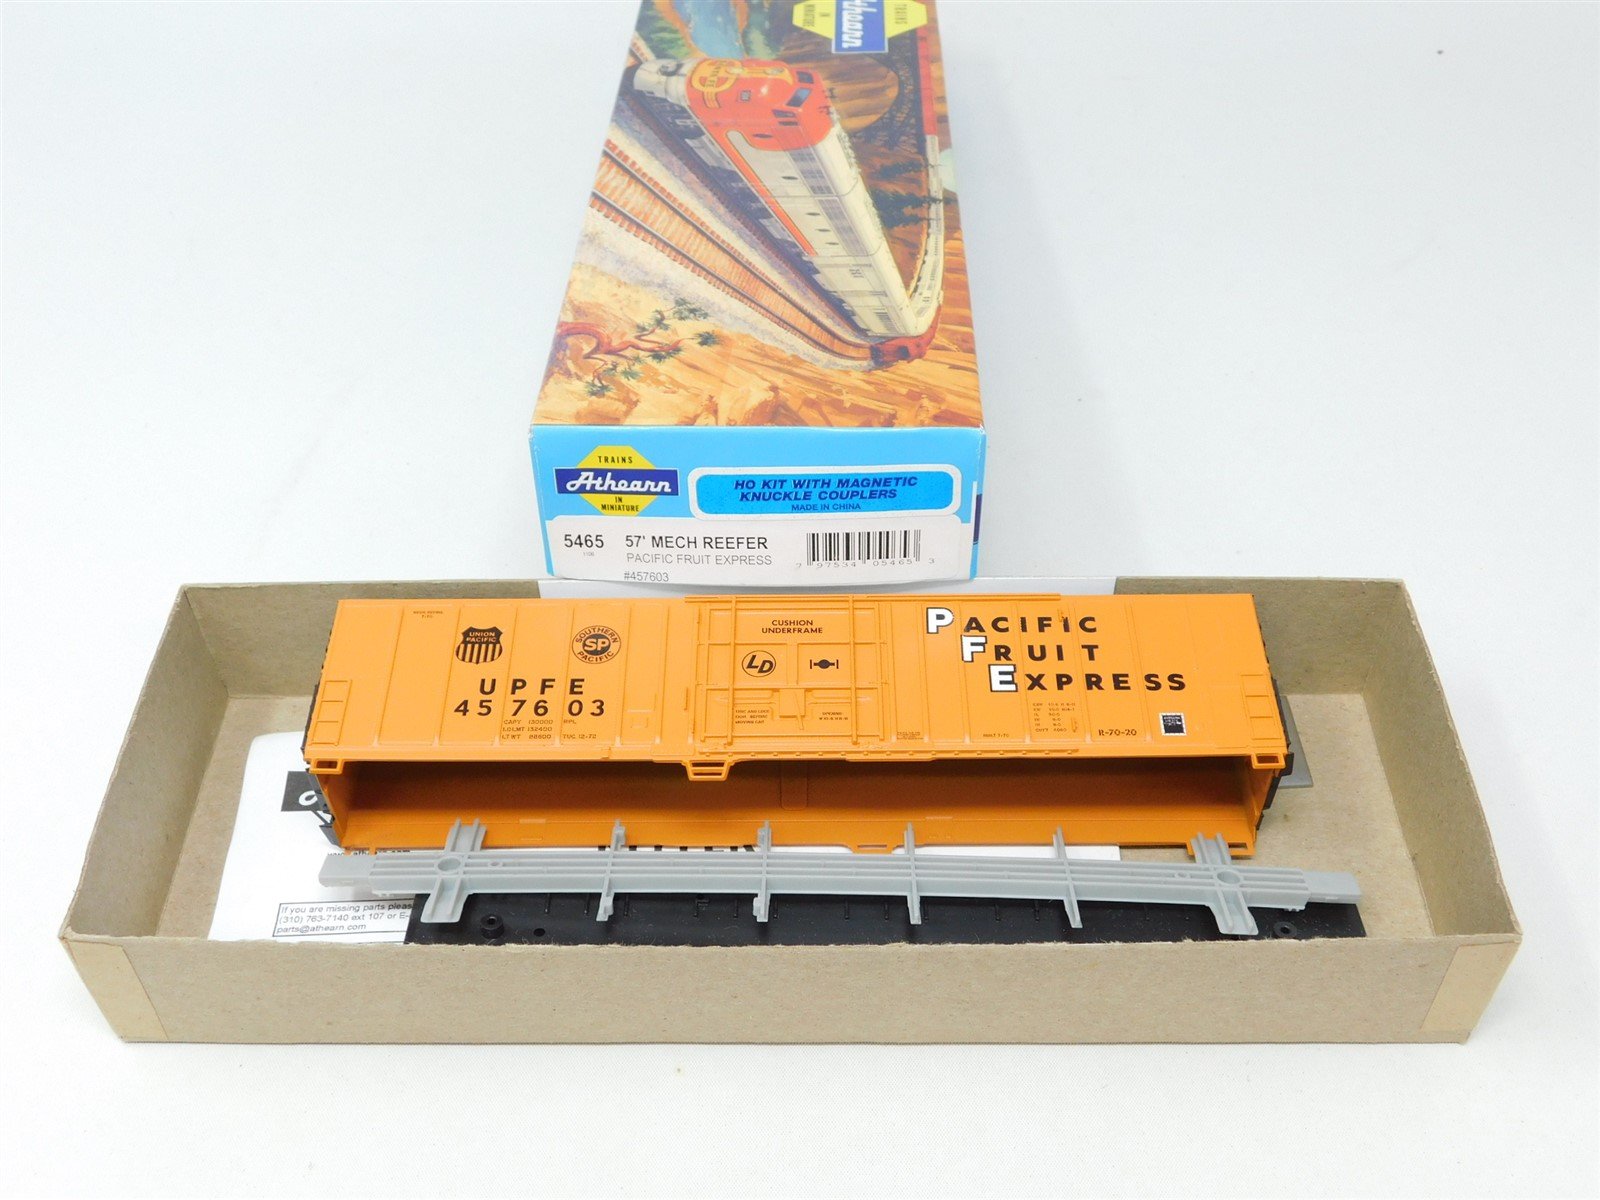 HO Scale Athearn Kit 5465 UPFE SP UP Pacific Fruit Express 57' Reefer #457603